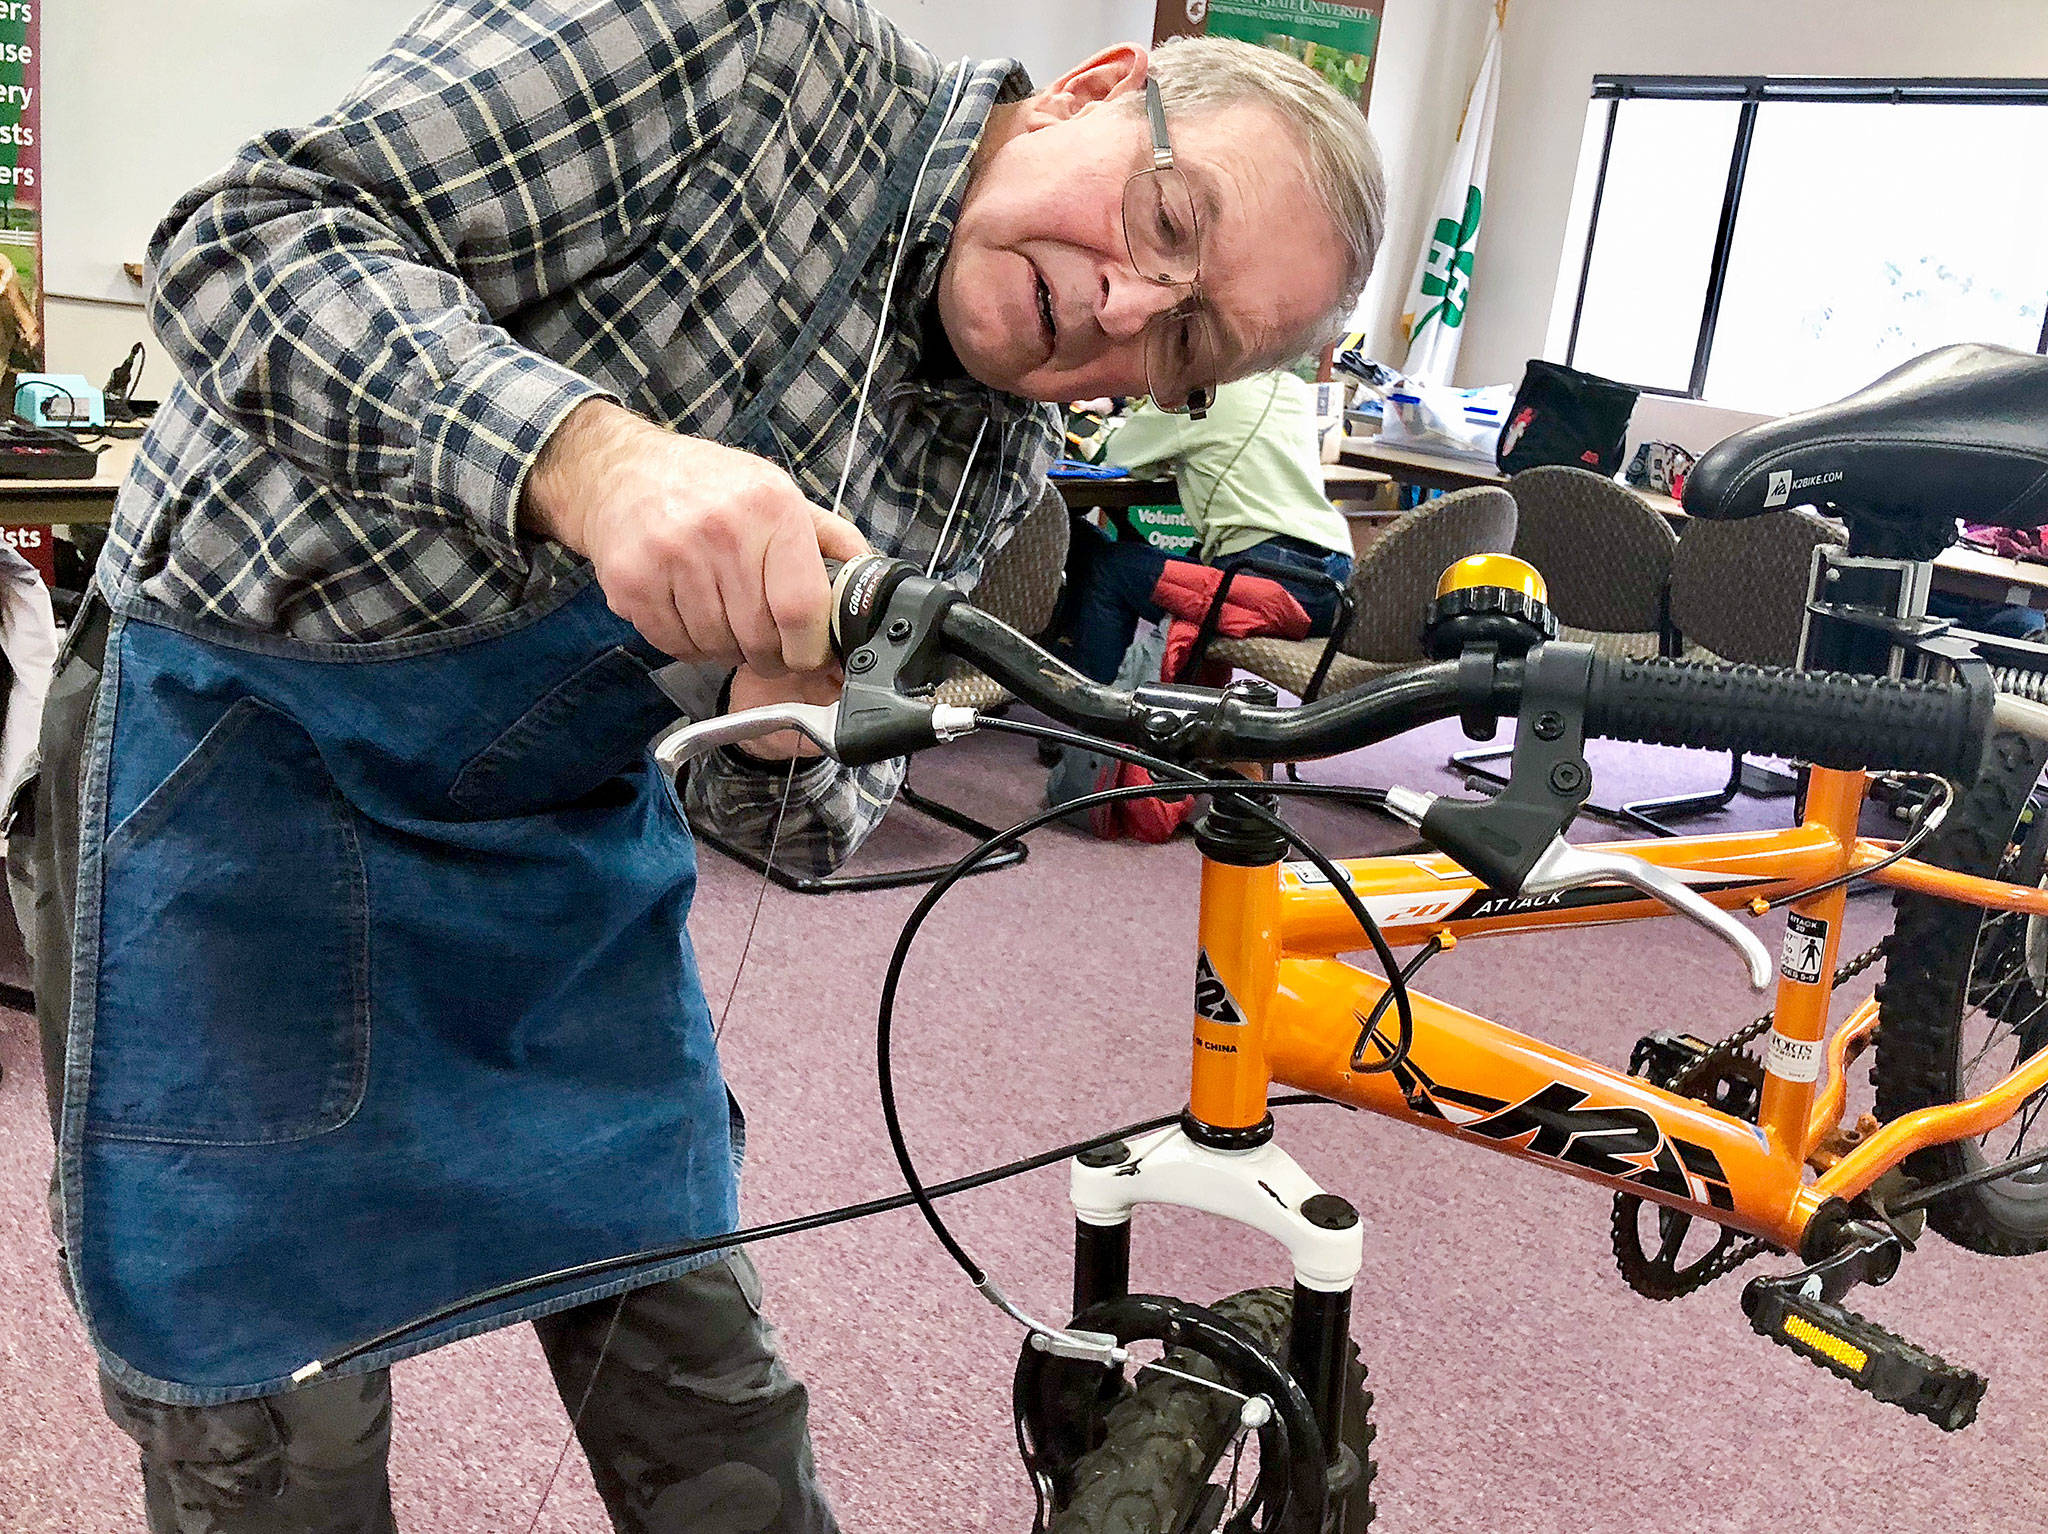 Dave Fox is among a dozen volunteers donating time at the Repair Cafe, a free monthly event where people bring things to be fixed. It is hosted by WSU Snohomish County Extension in McCollum Park. (Andrea Brown / The Herald)